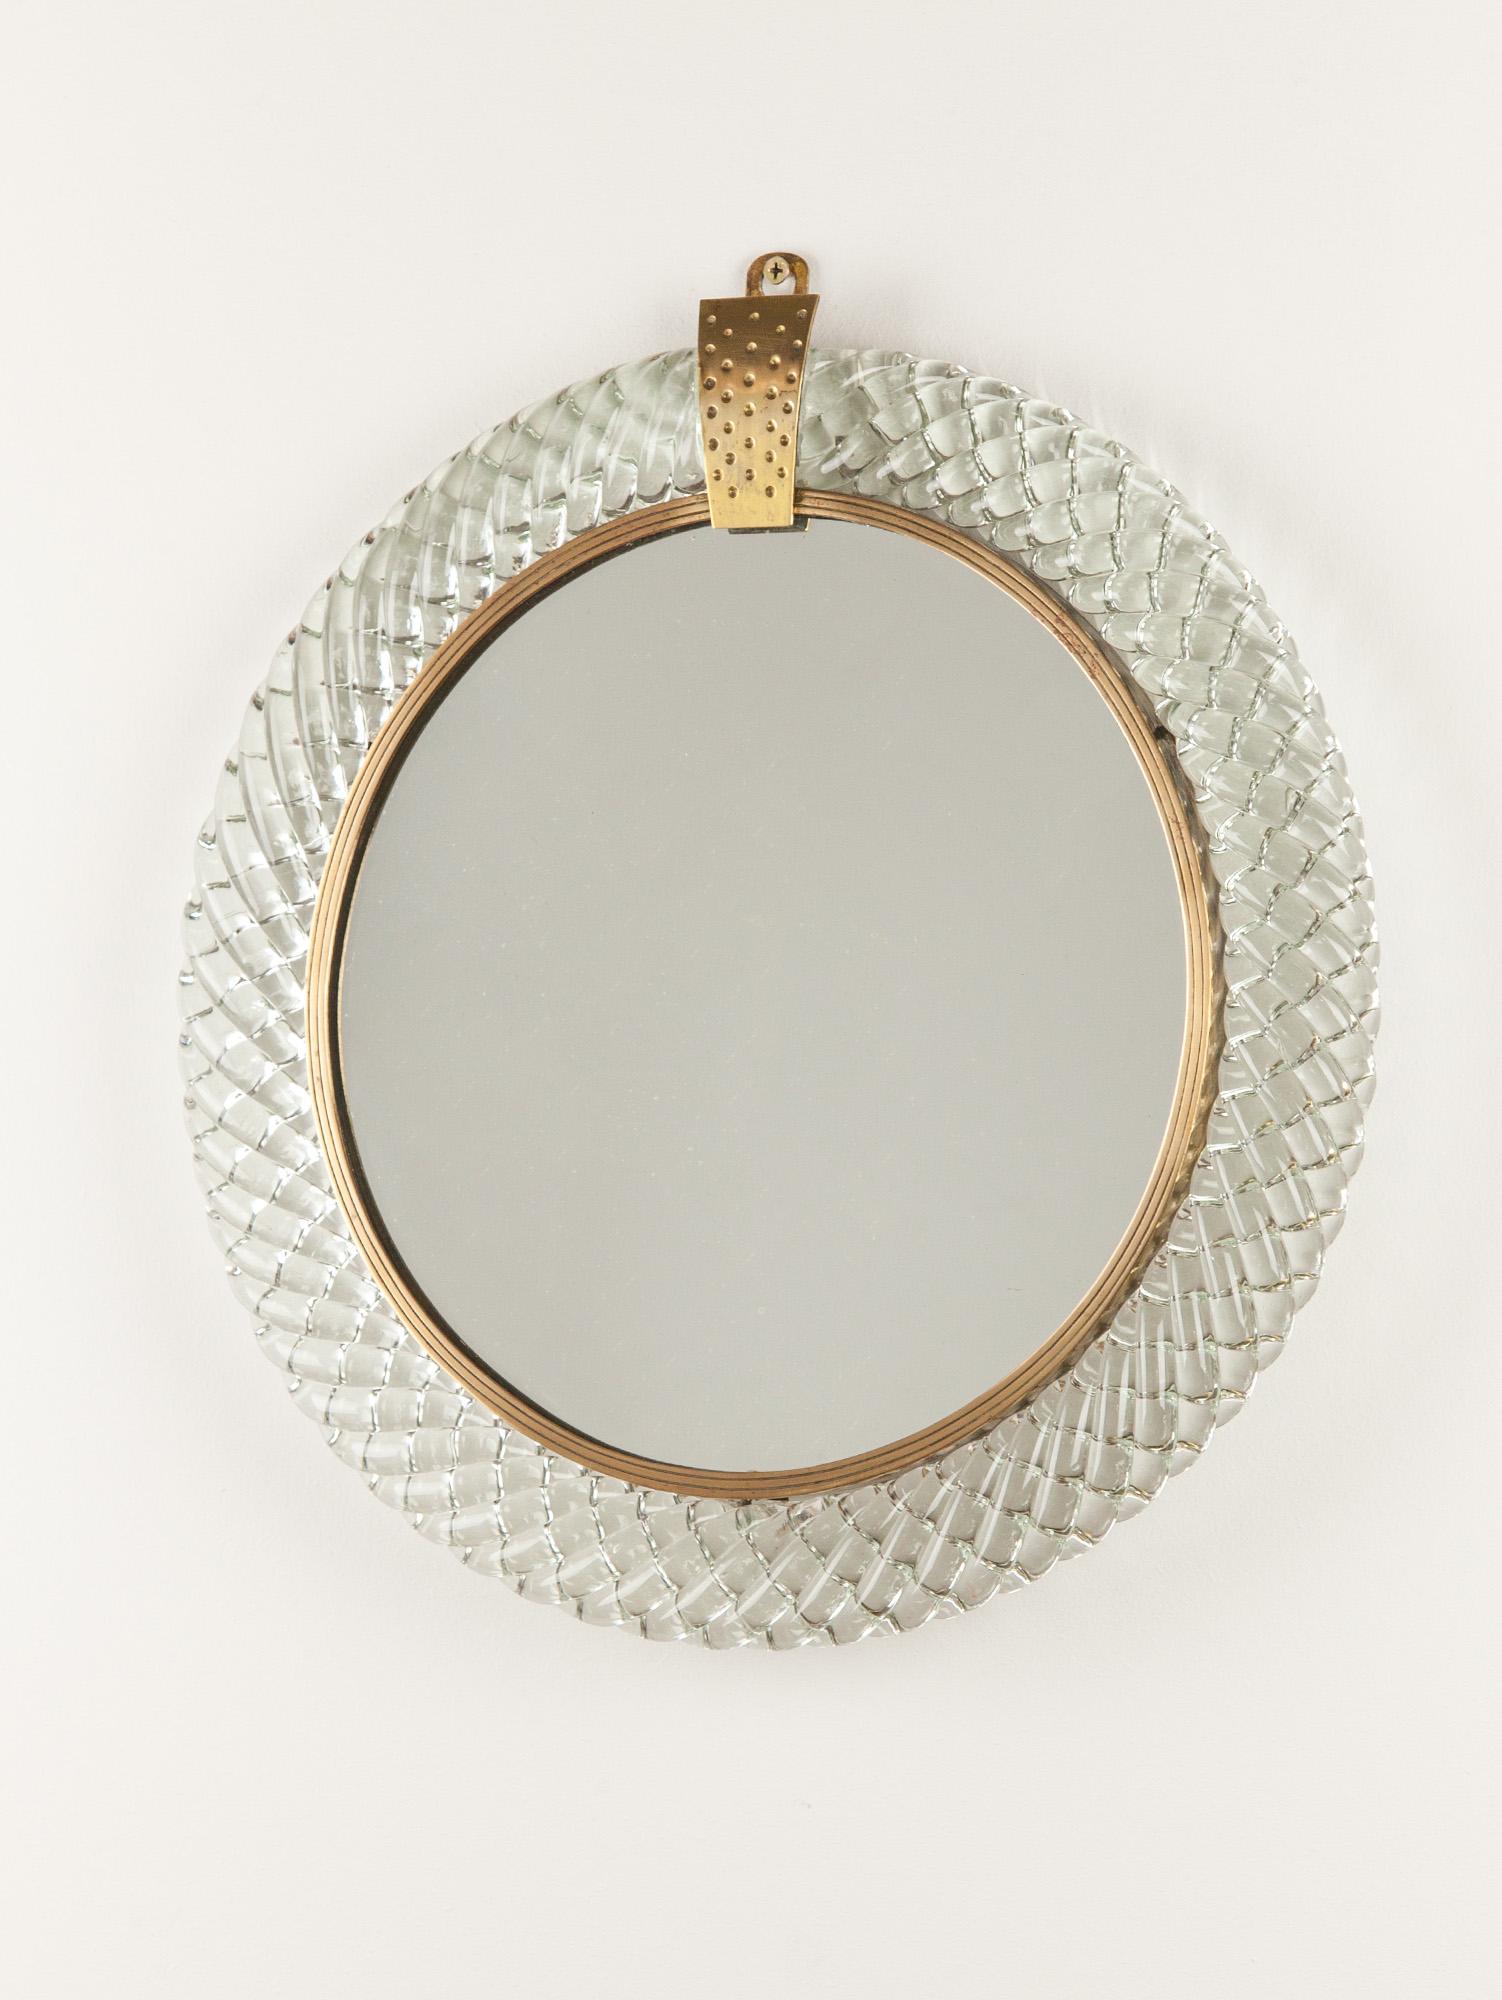 Vintage round wall mirror by Carlo Scarpa for Venini. The mirror is encased in a brass frame with the lovely ‘treccia’ (braided) Murano glass surround. Beautiful detailing is seen throughout from the brass frame to the Murano glass. Made in Italy in